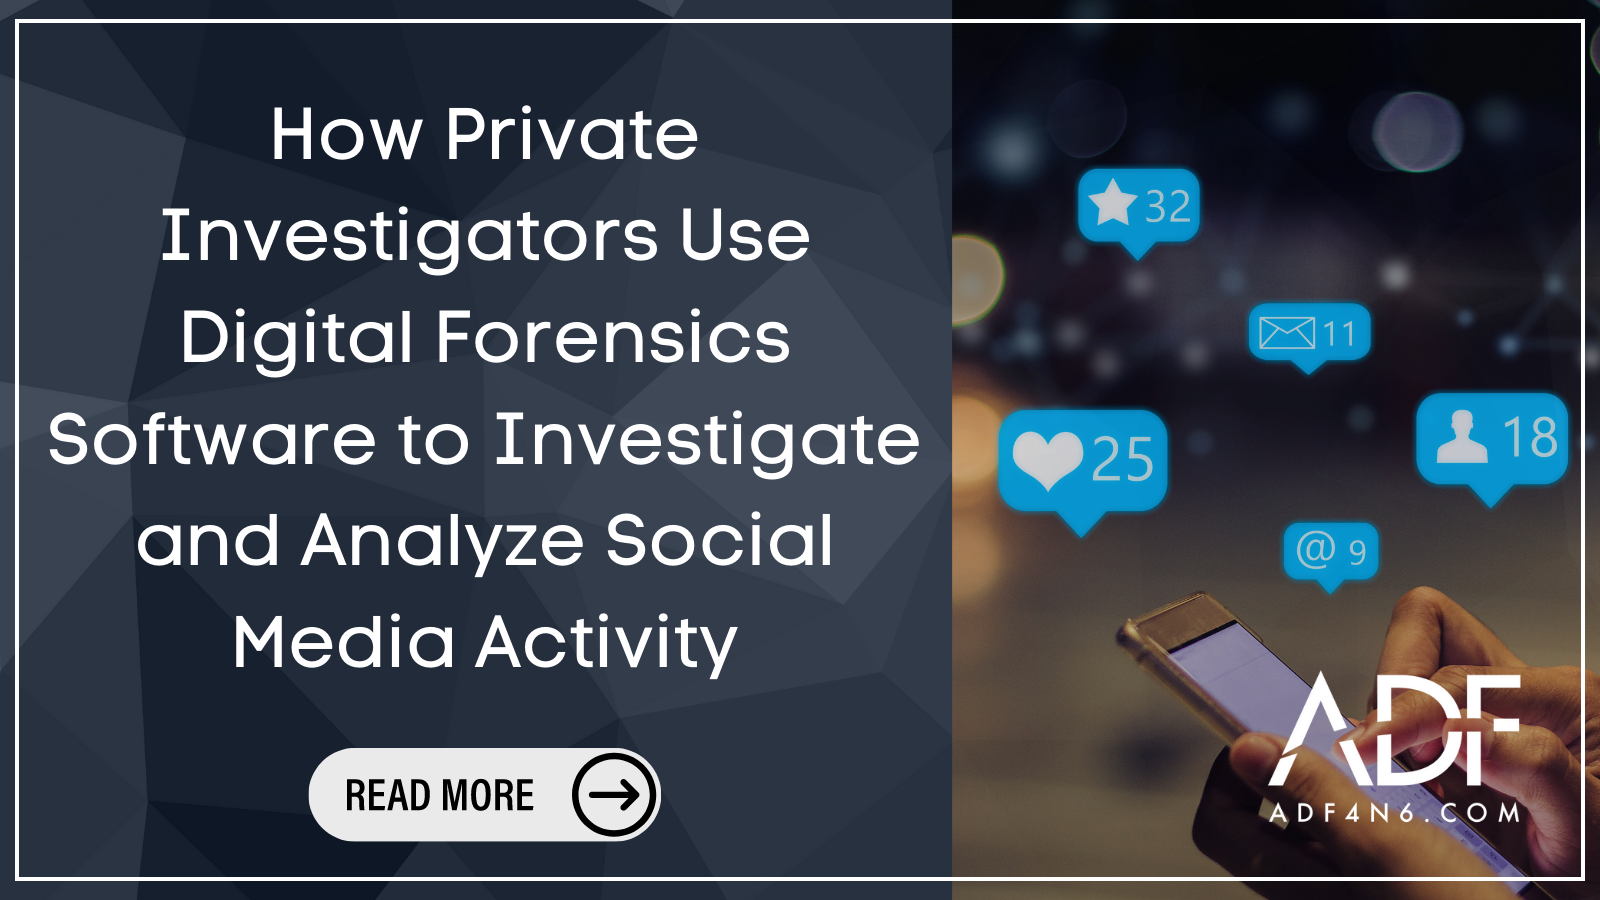 How Do Private Investigators use Digital Forensics for Social Apps?